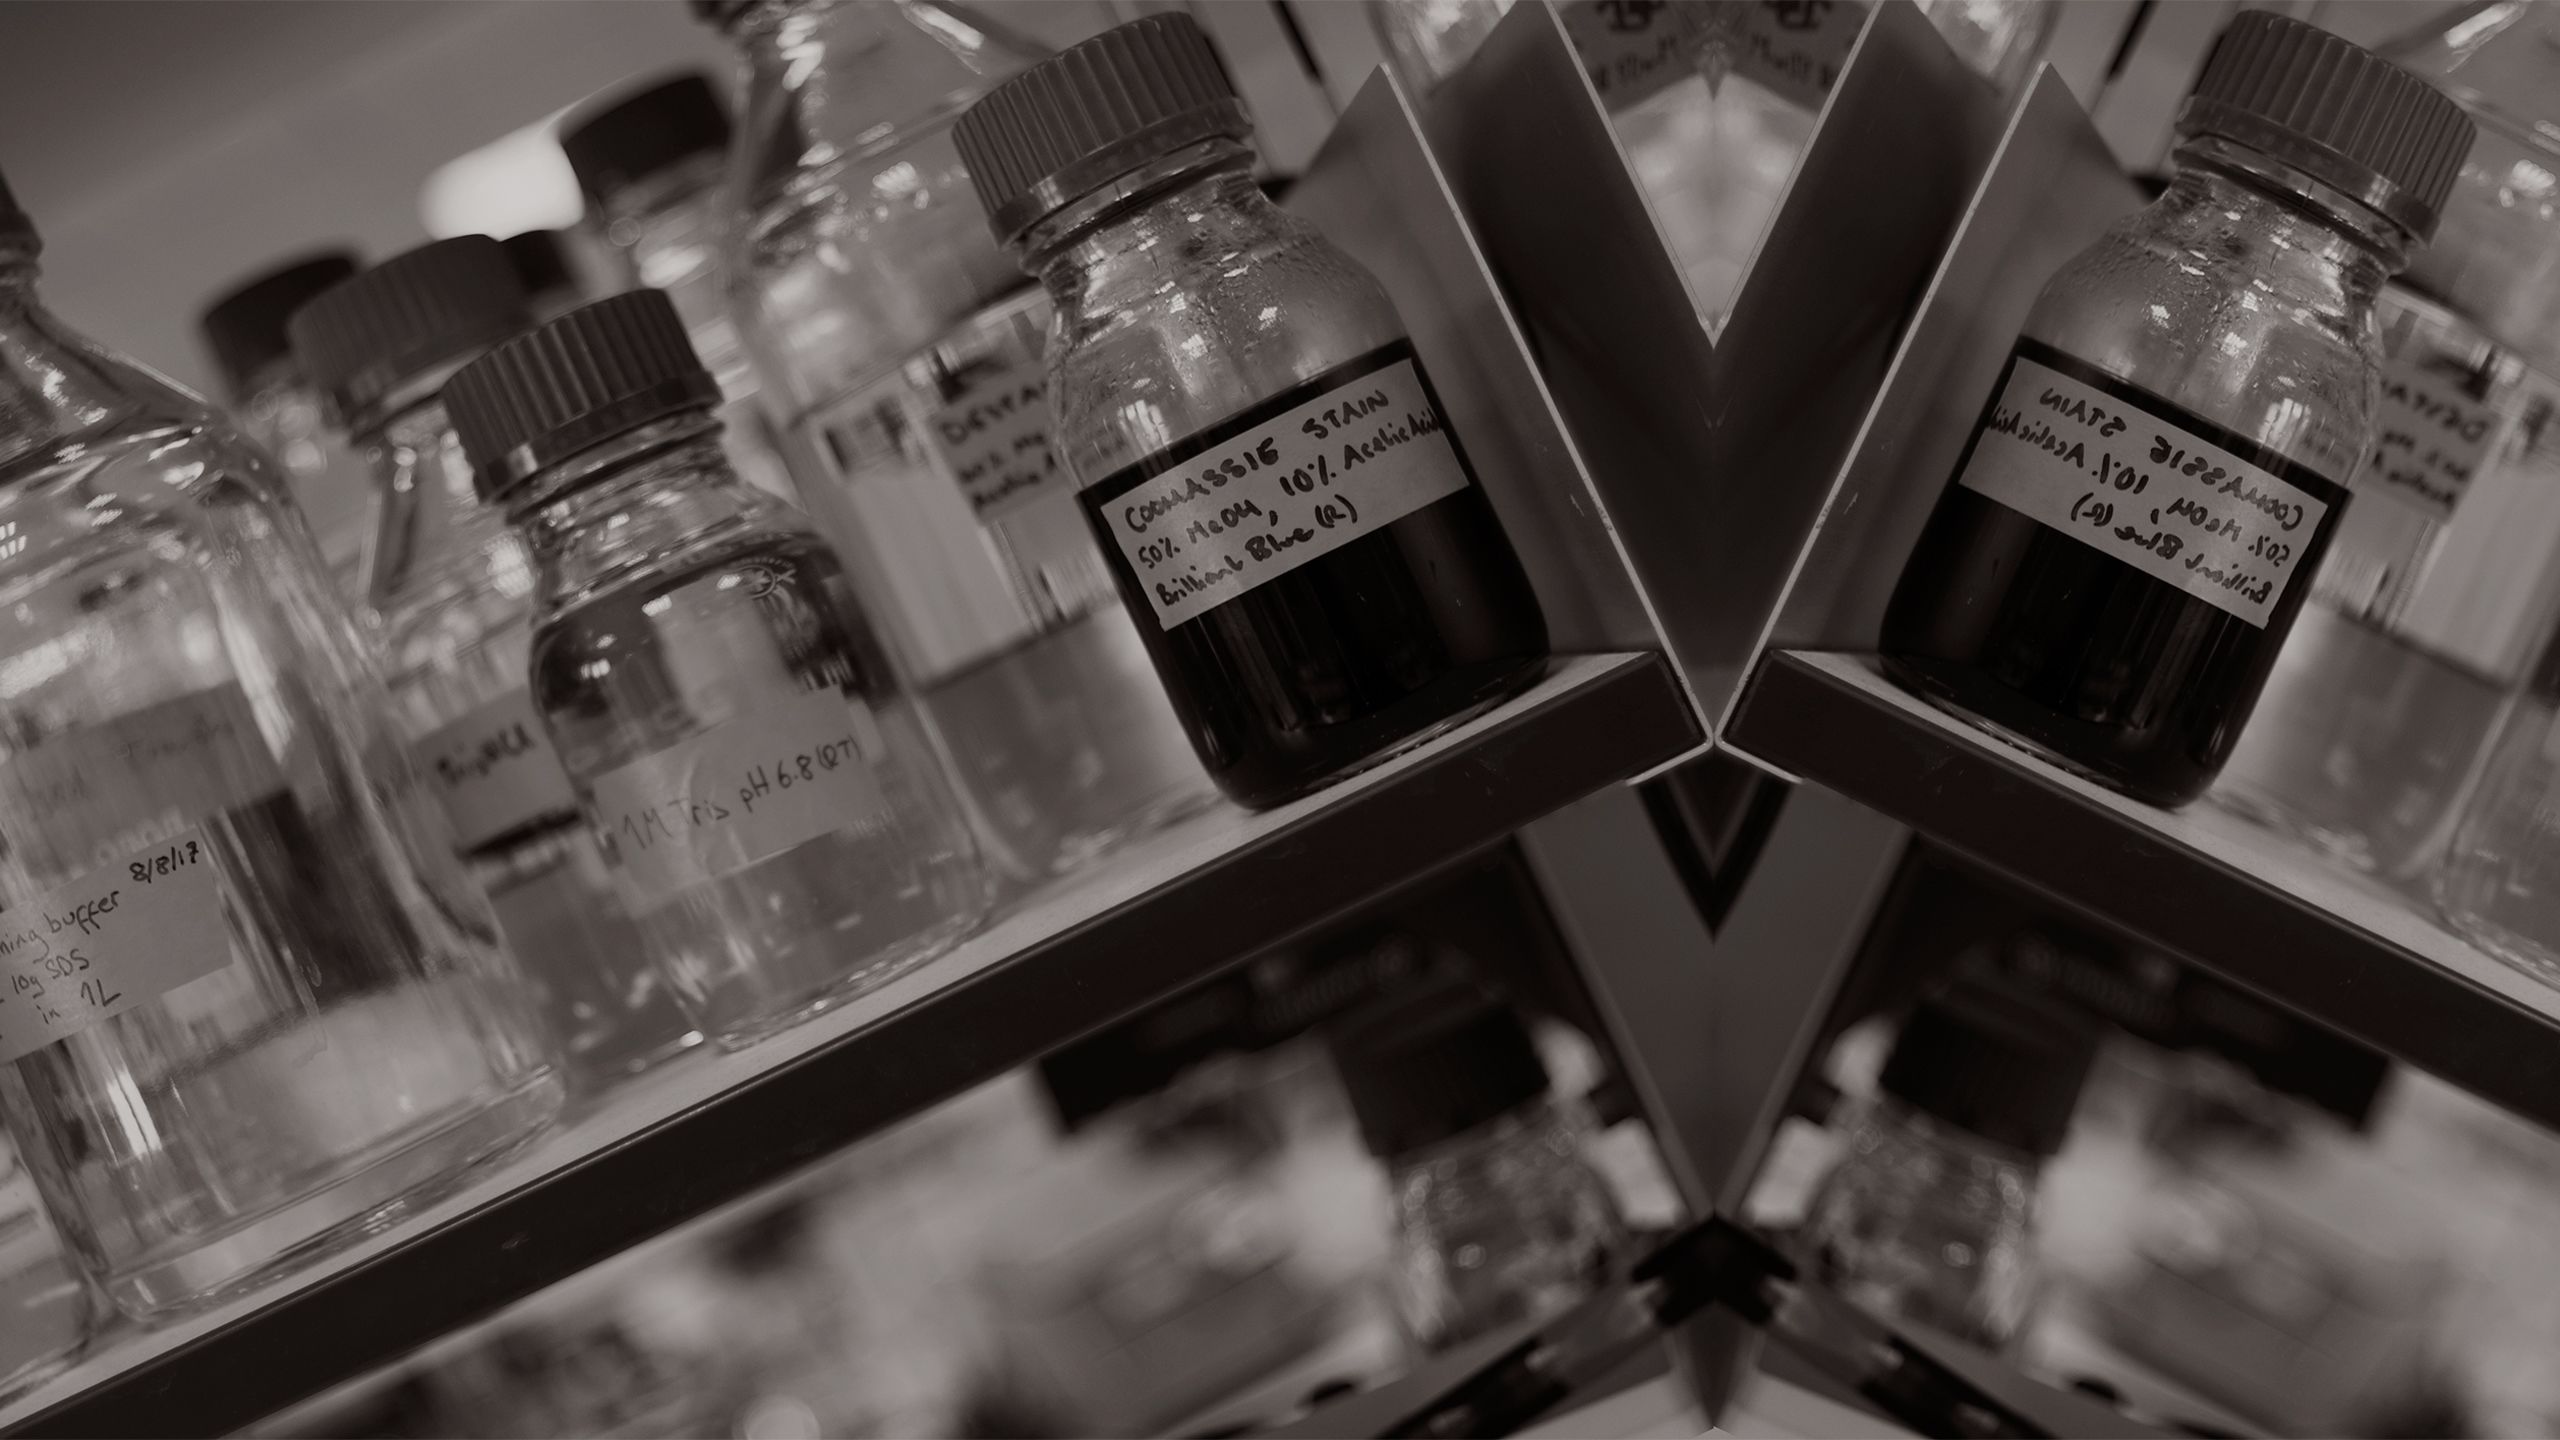 Black and white mirror image of solution bottles on a shelf in a lab at an angle 